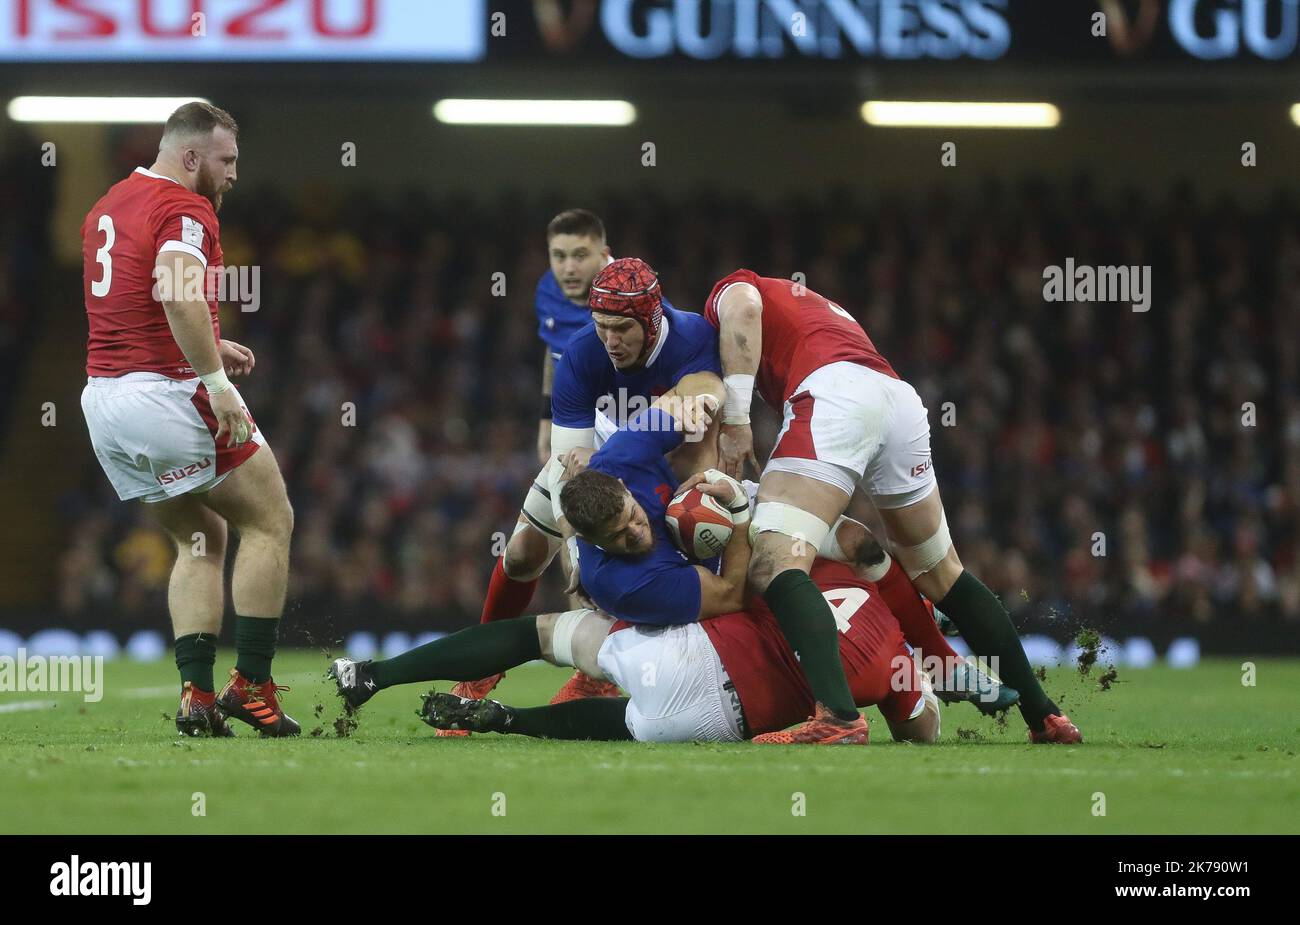 Paul Willemse  , Bernard Le roux of France Arthur Vincent , Gael Fickou of France and Dillon Lewis ,Jake Ball , Alun-Wyn Jones of Wales during the Guinness Six Nations 2020, rugby union match between Wales and France on February 22, 2020 at Principality Stadium in Cardiff, Wales - Photo Laurent Lairys / MAXPPP Stock Photo